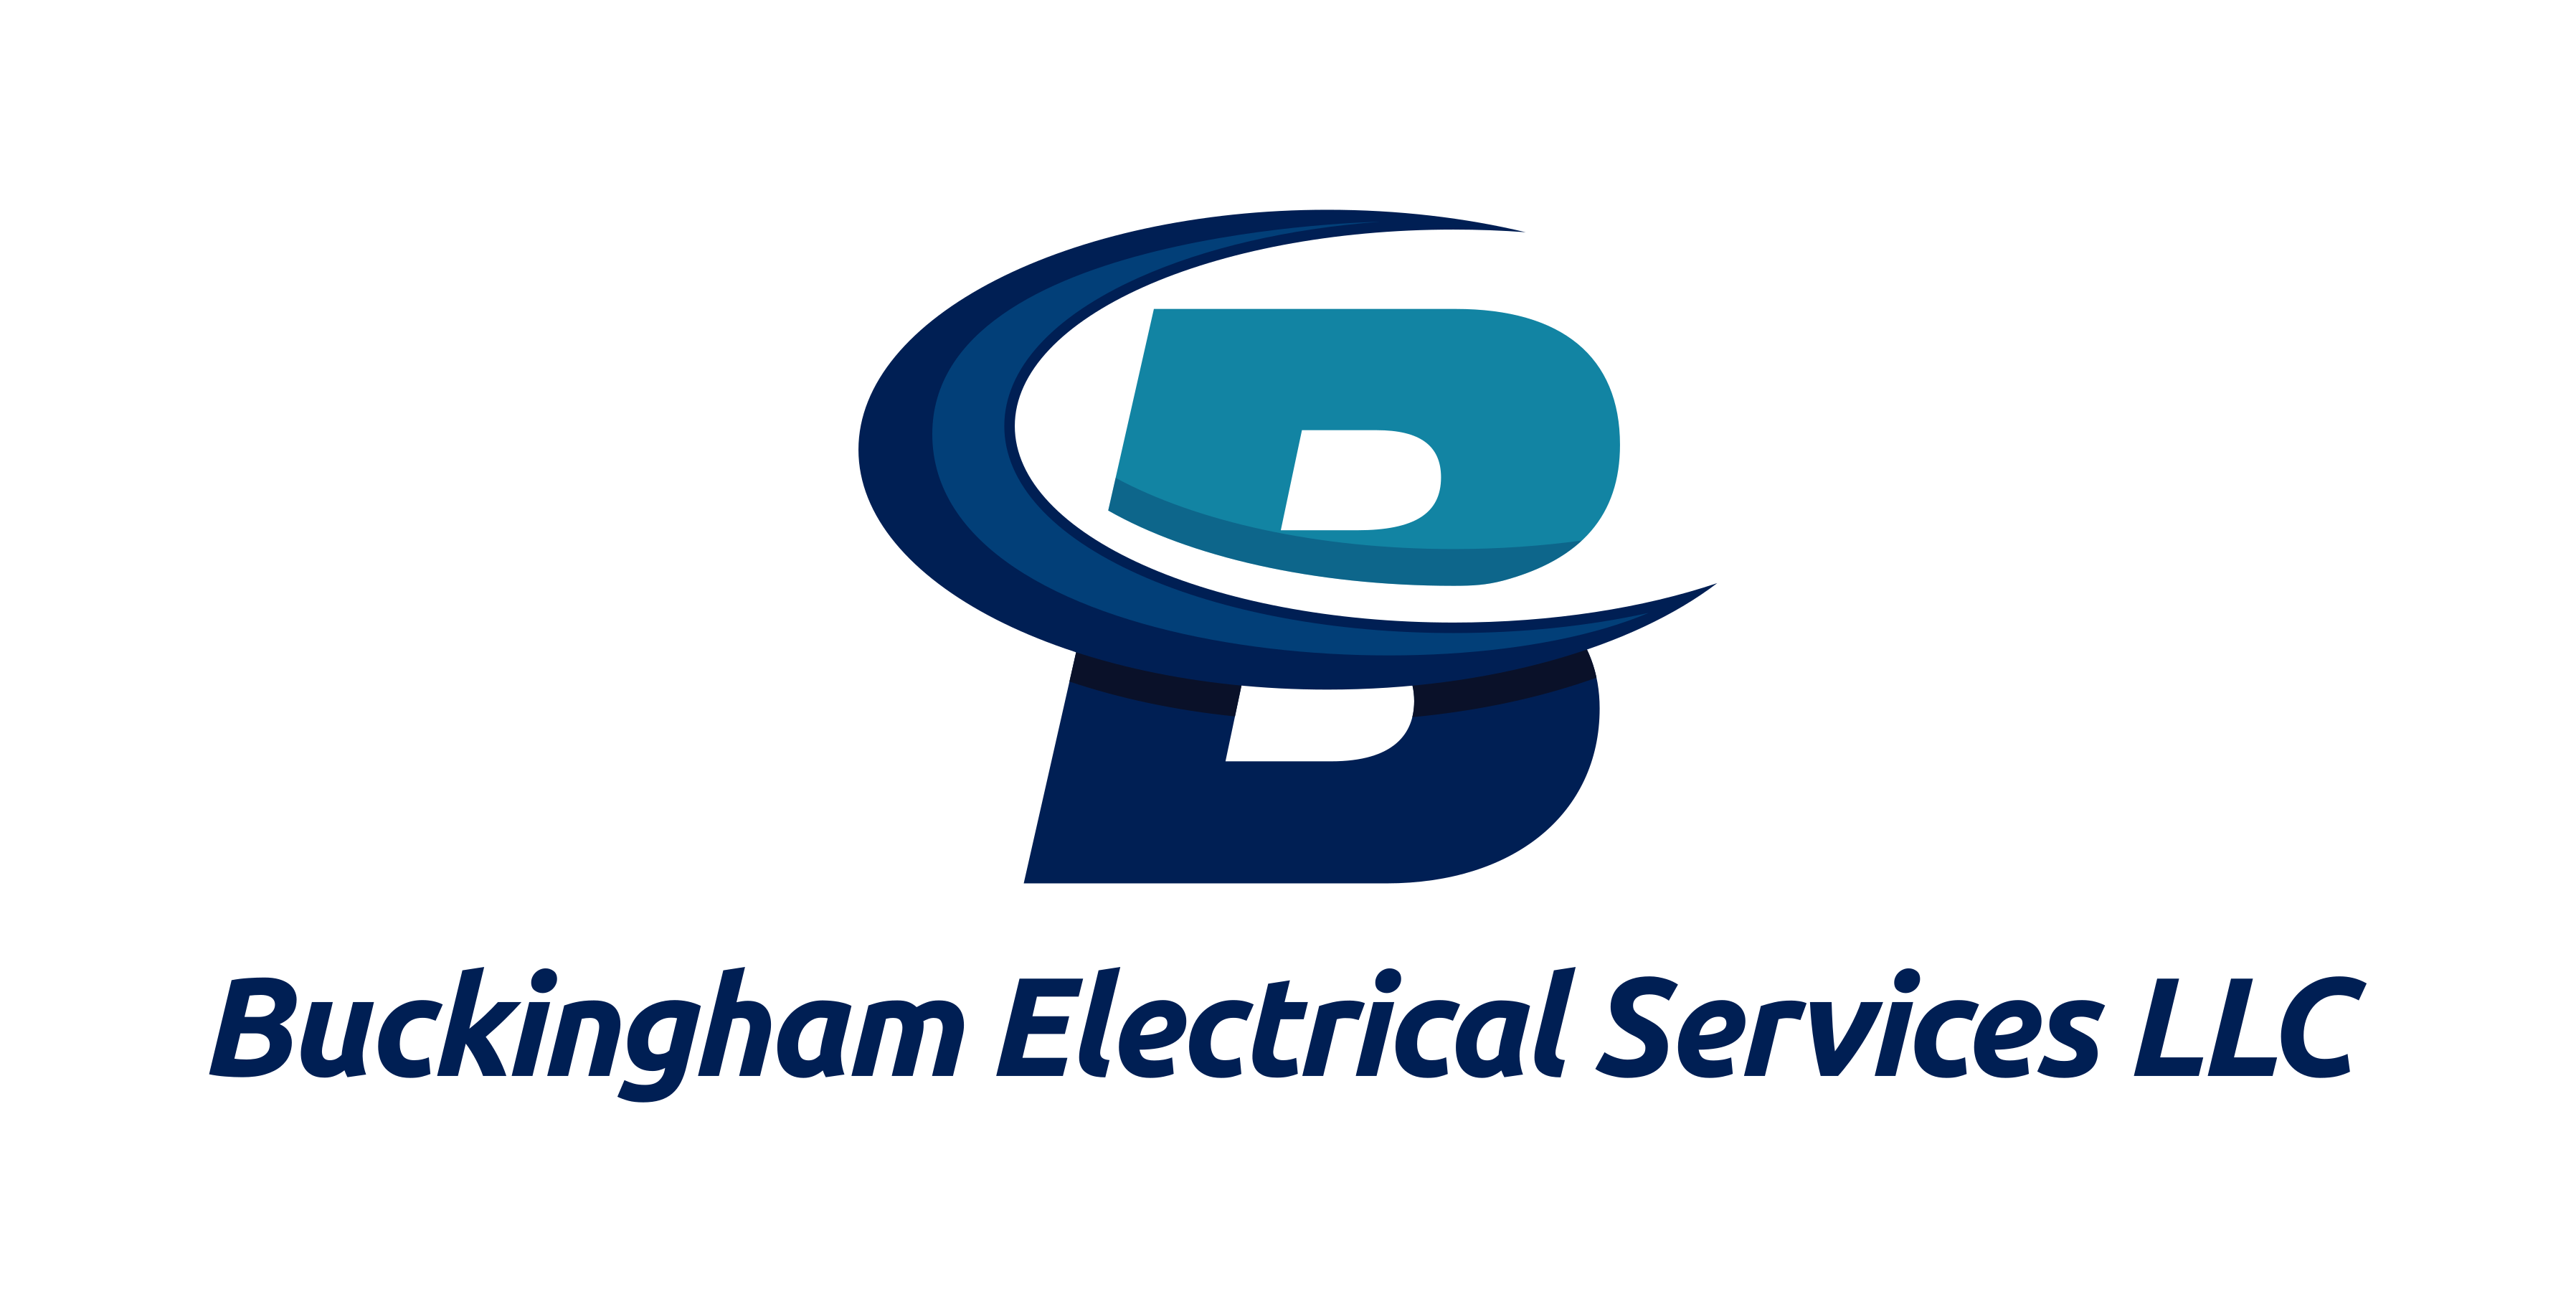 Buckingham Electrical Services